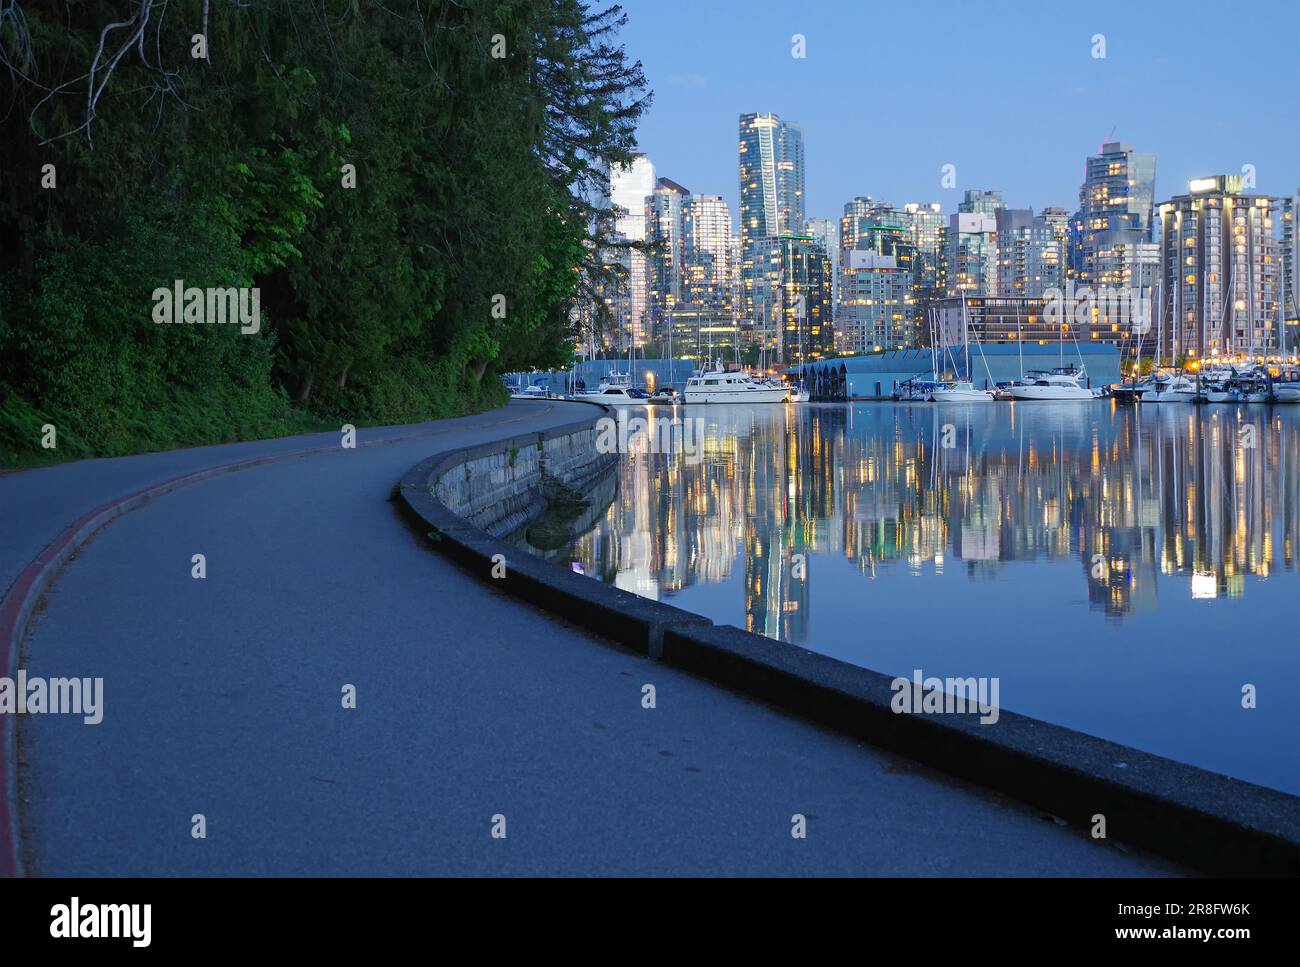 Illuminated skyscrapers and pleasure boats reflected in the calm water, parts of the Sea Wall with bike path in Stanley Park, dusk, Vancouver Stock Photo